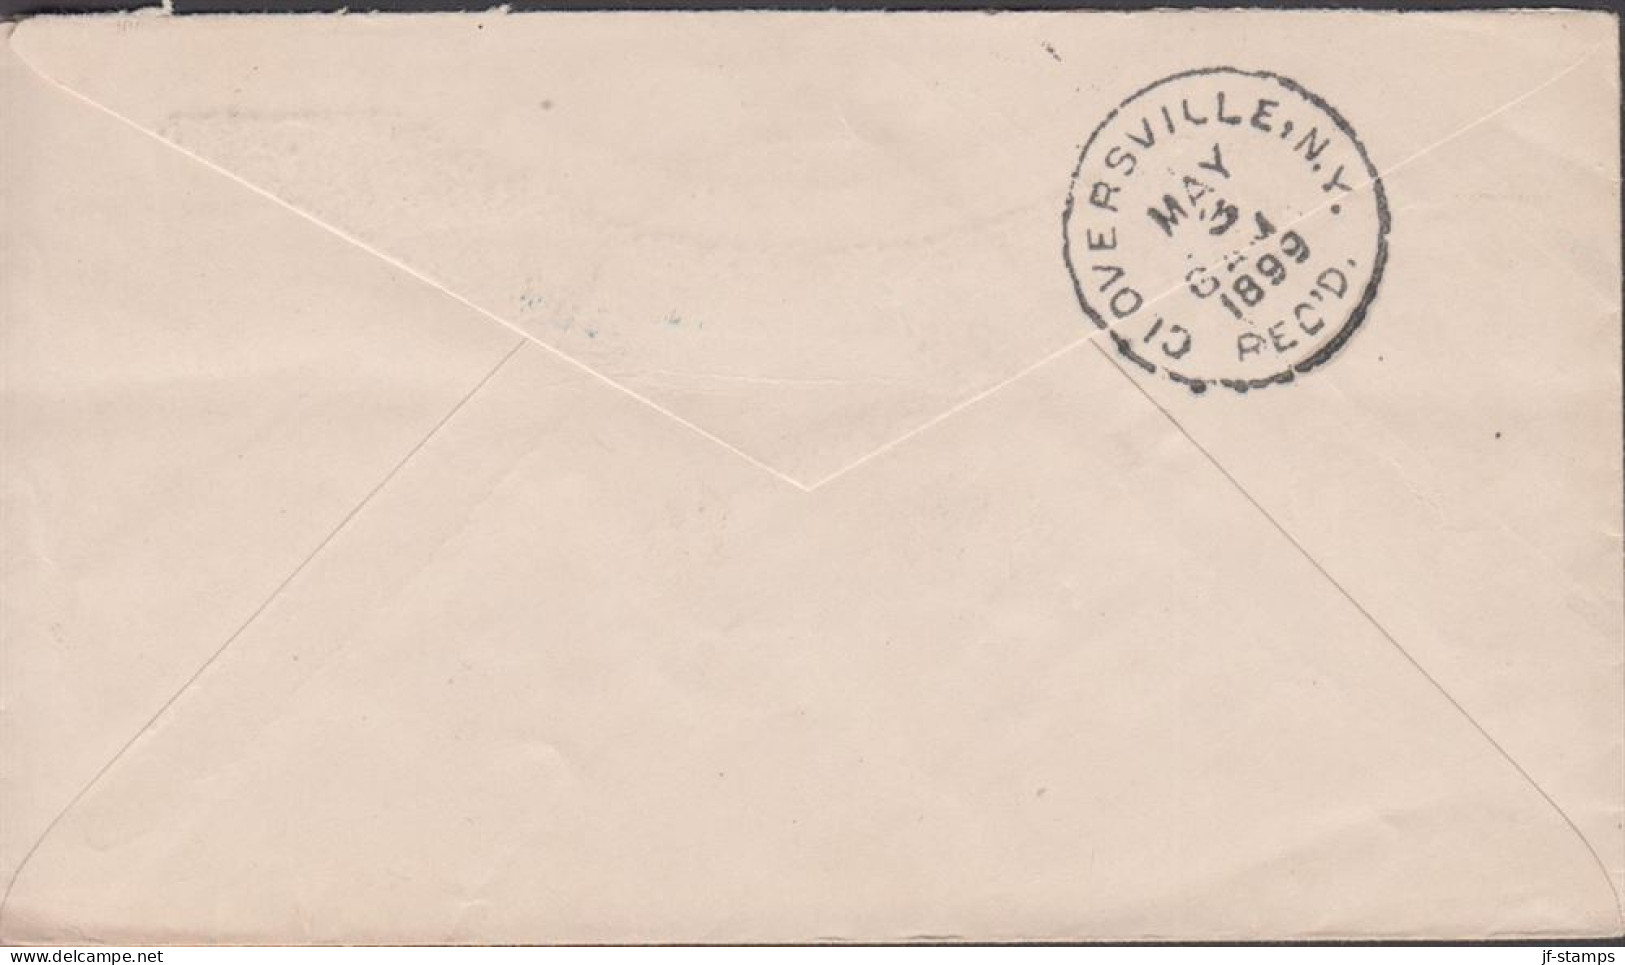 1899. CANADA, Victoria. 2 CENTS On Cover To Cloversville, USA Cancelled WINNIPIG 7 AP 29 99 CA... (Michel 64) - JF439376 - Covers & Documents